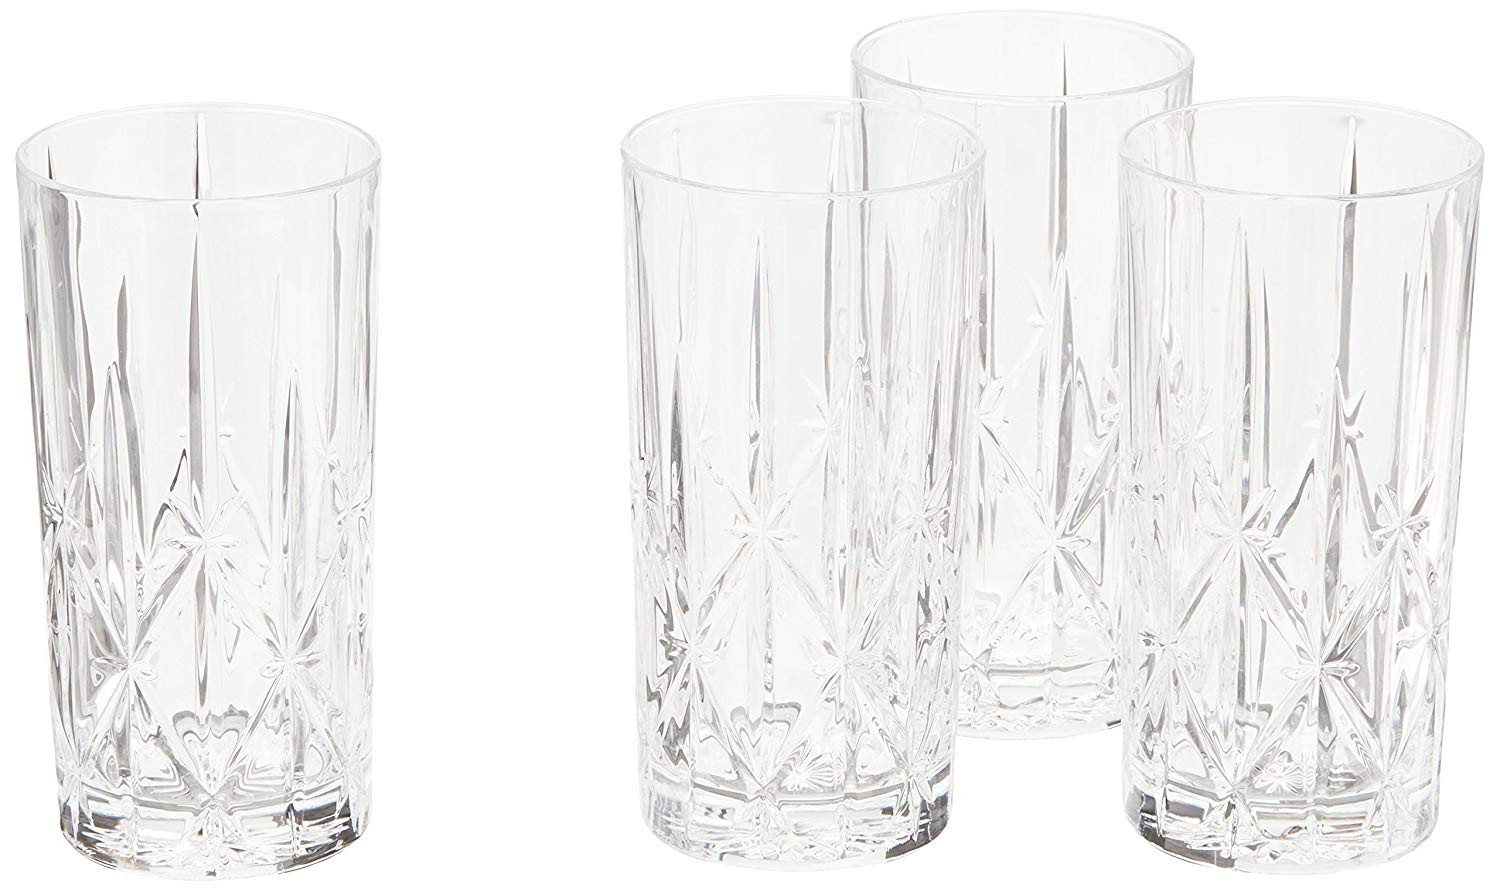 15 Stunning Marquis by Waterford 9 Inch Vase 2024 free download marquis by waterford 9 inch vase of amazon com marquis sparkle goblet 10 ounce set of 4 wine goblets intended for amazon com marquis sparkle goblet 10 ounce set of 4 wine goblets bar cocktai